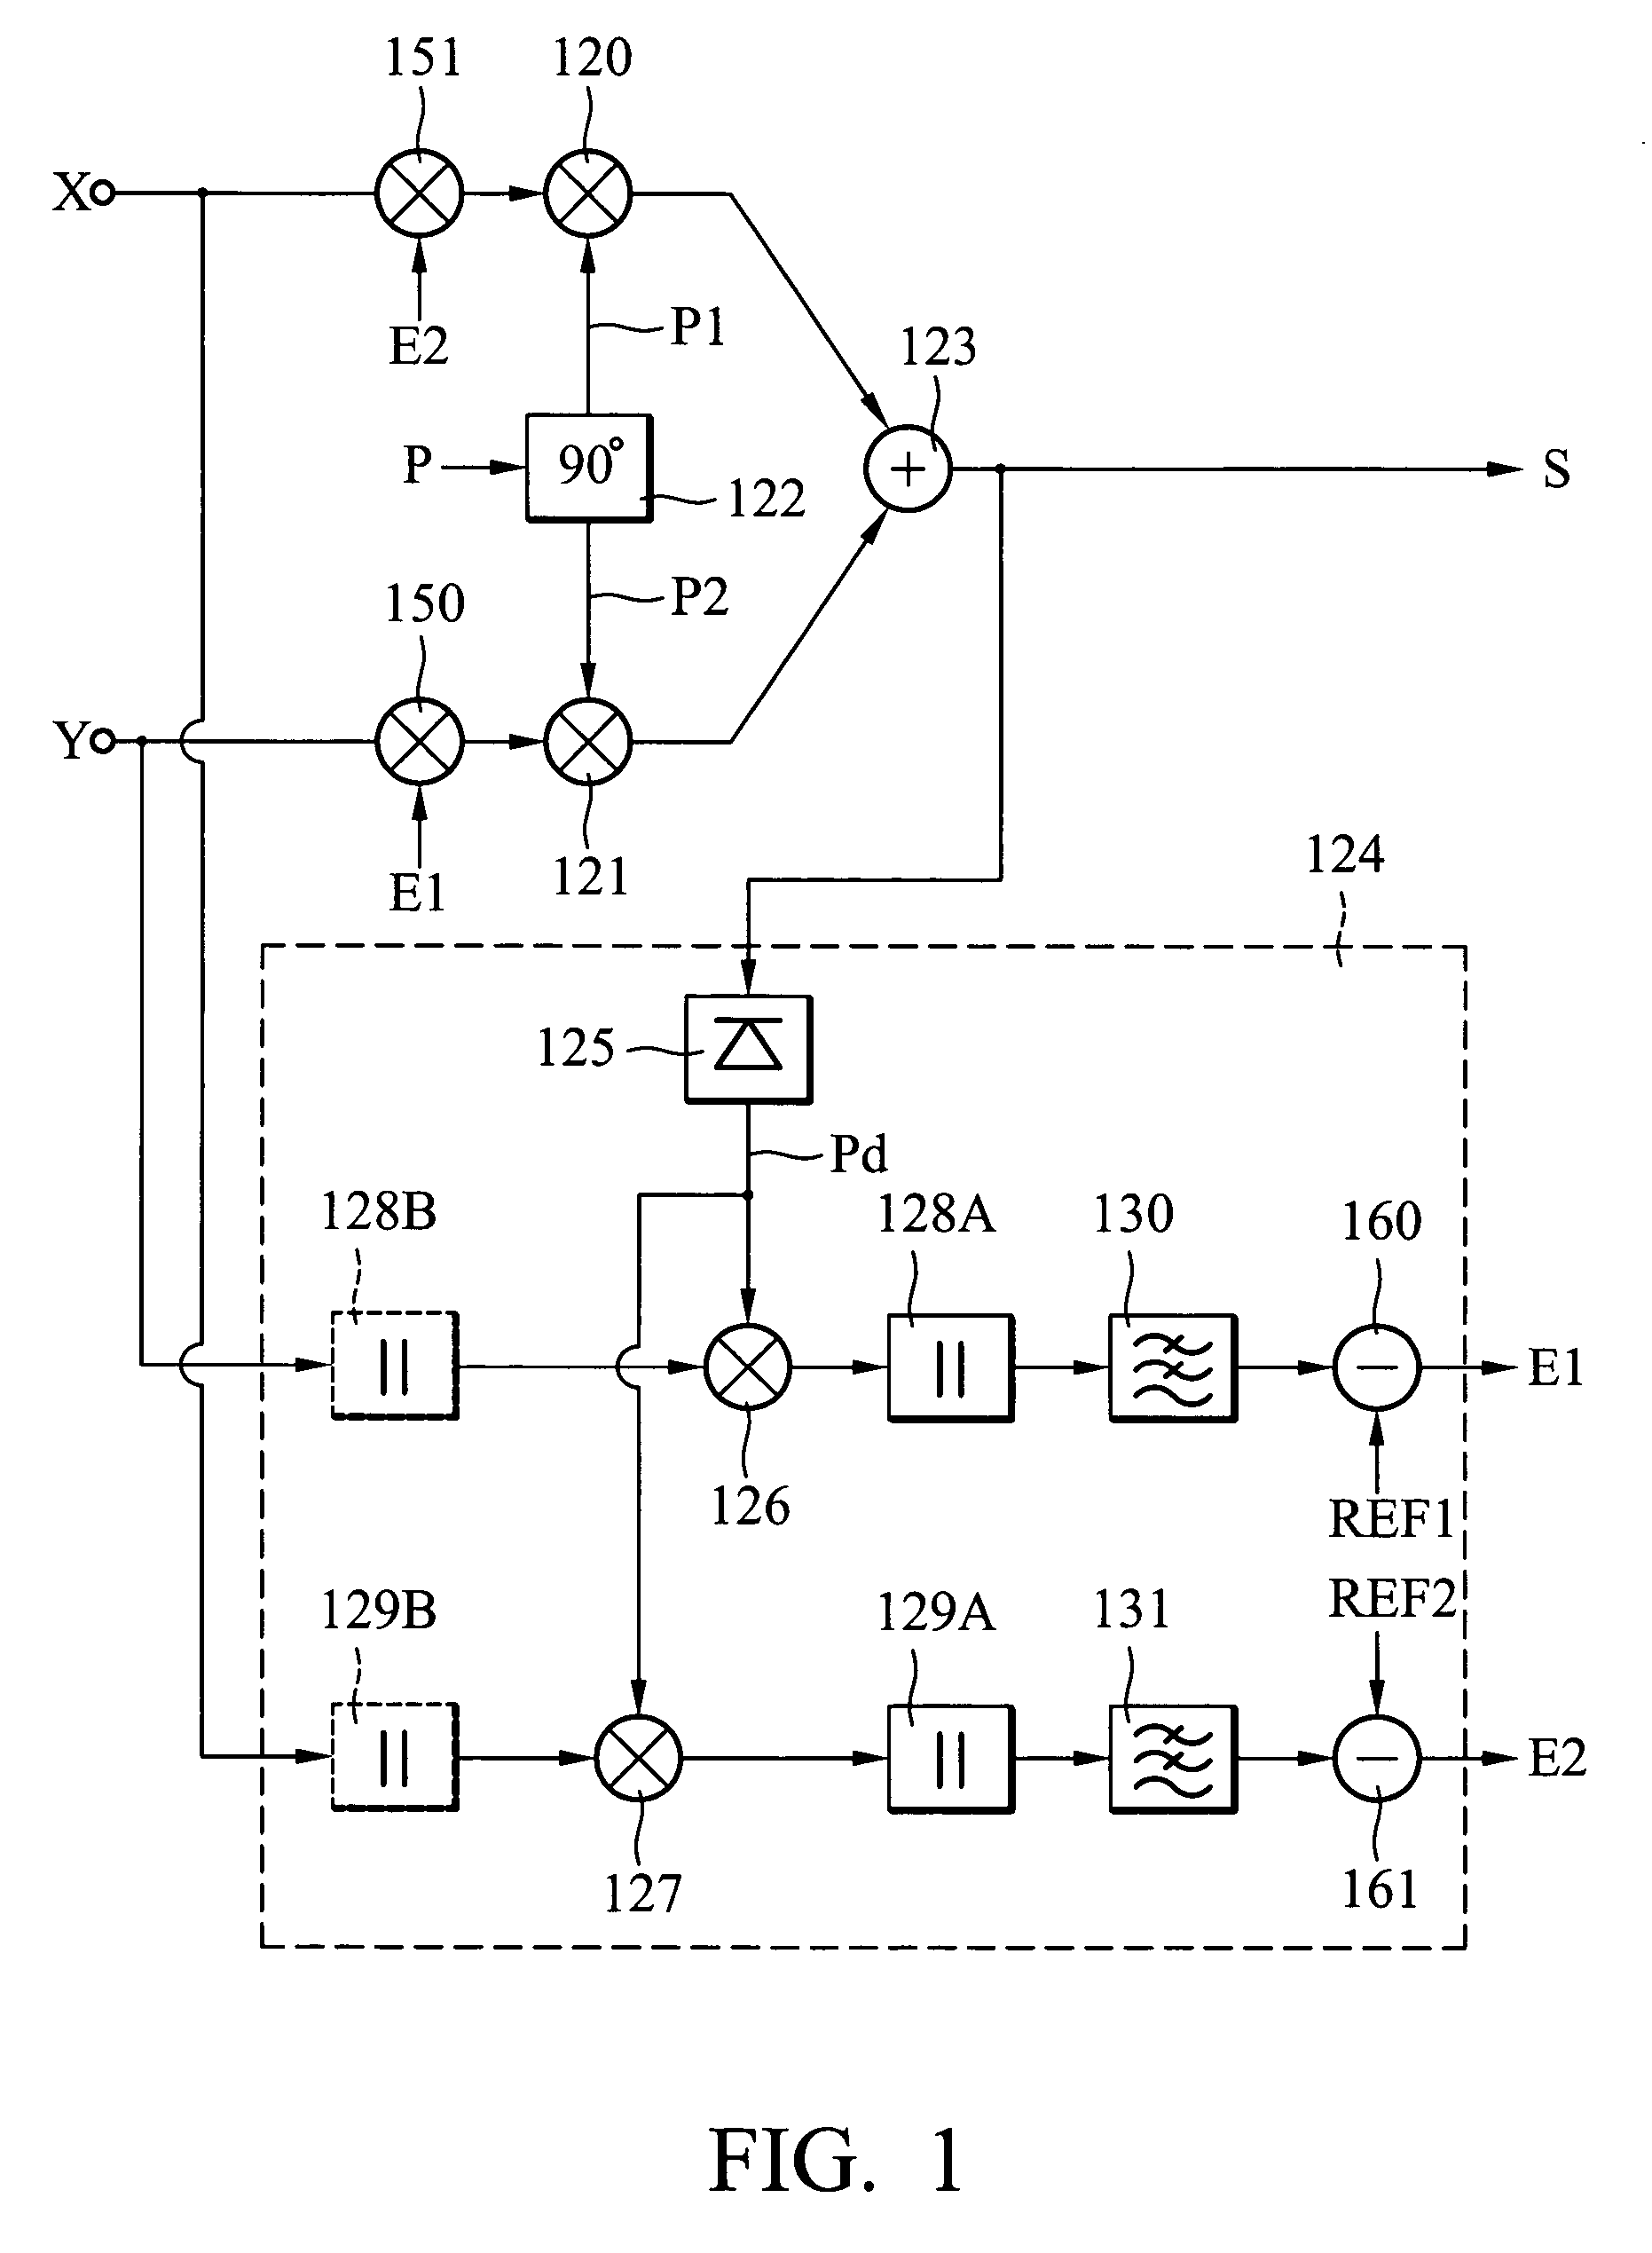 Method and apparatus for I/Q imbalance calibration of a transmitter system